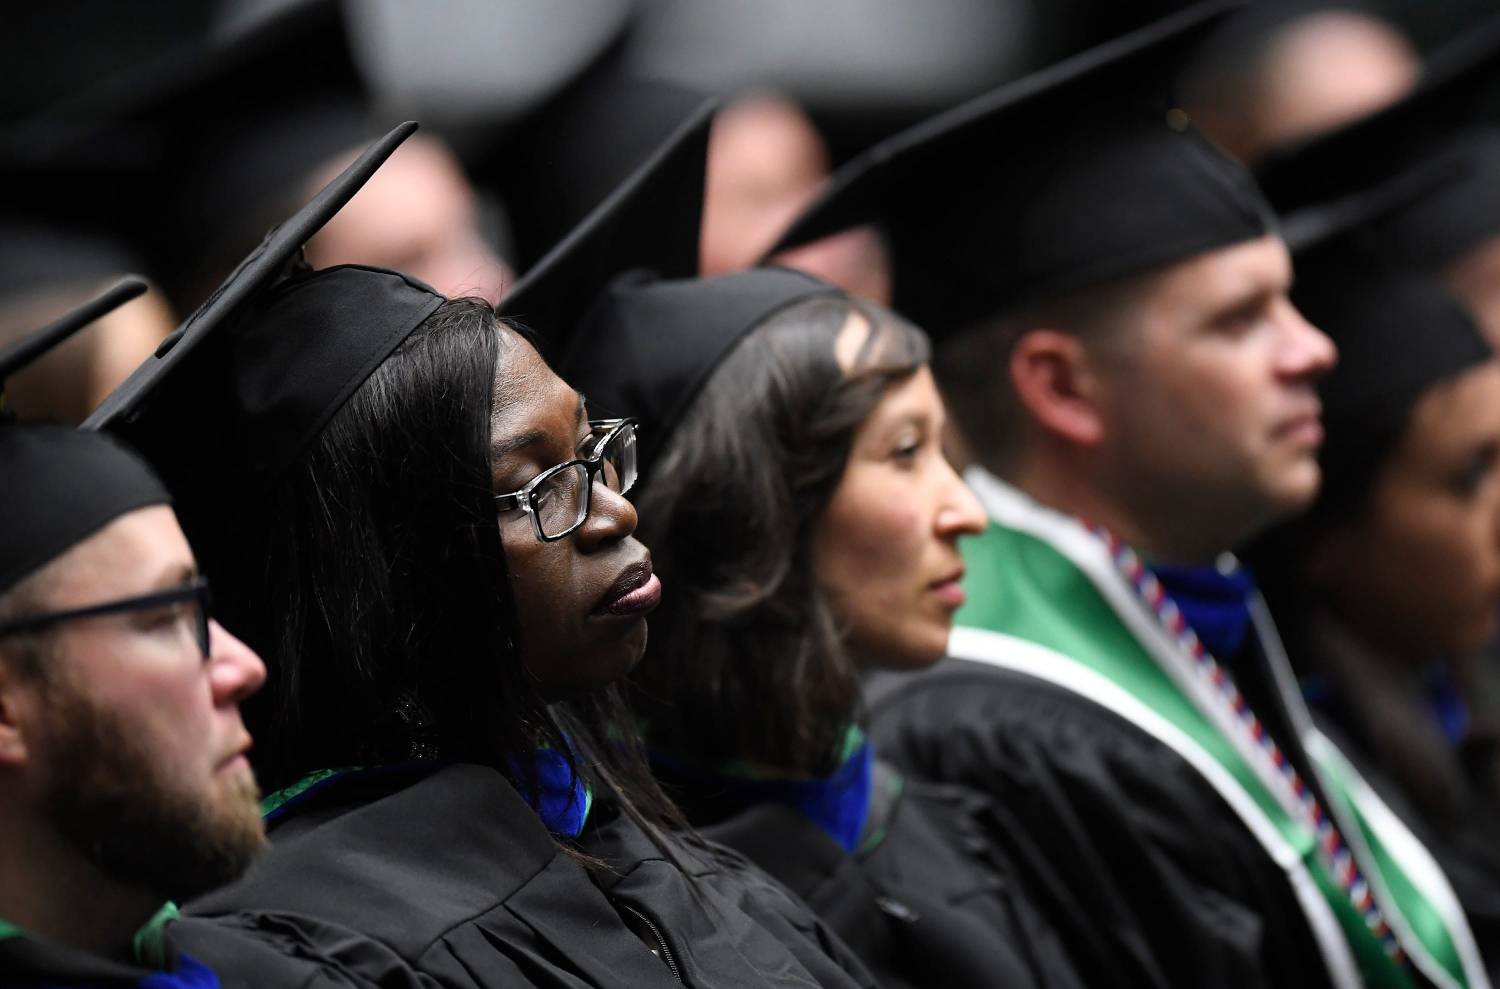 Students listen to the student speaker during the graduation ceremony for the College of Business in Moby Arena at Colorado State University in Fort Collins, Colo. on Friday, Dec. 20, 2019.122019 Csu Cobgraduation 08 Bb